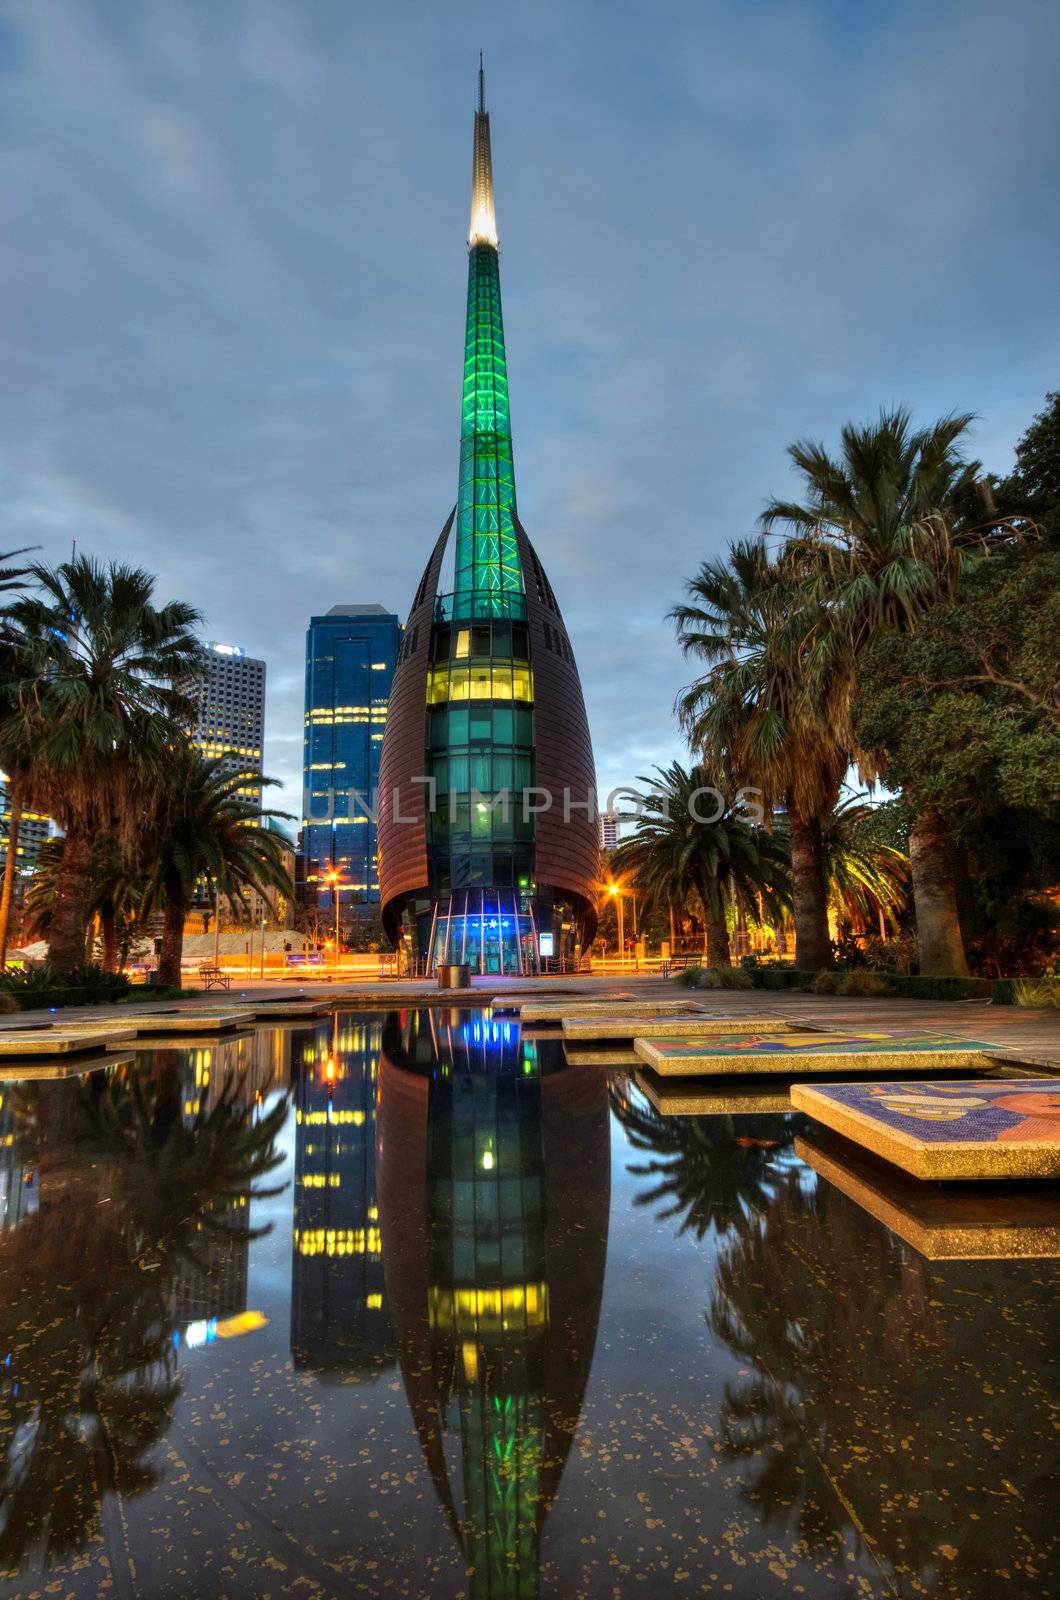 Swan Bell Tower at Night Perth Western Australia by Imagevixen